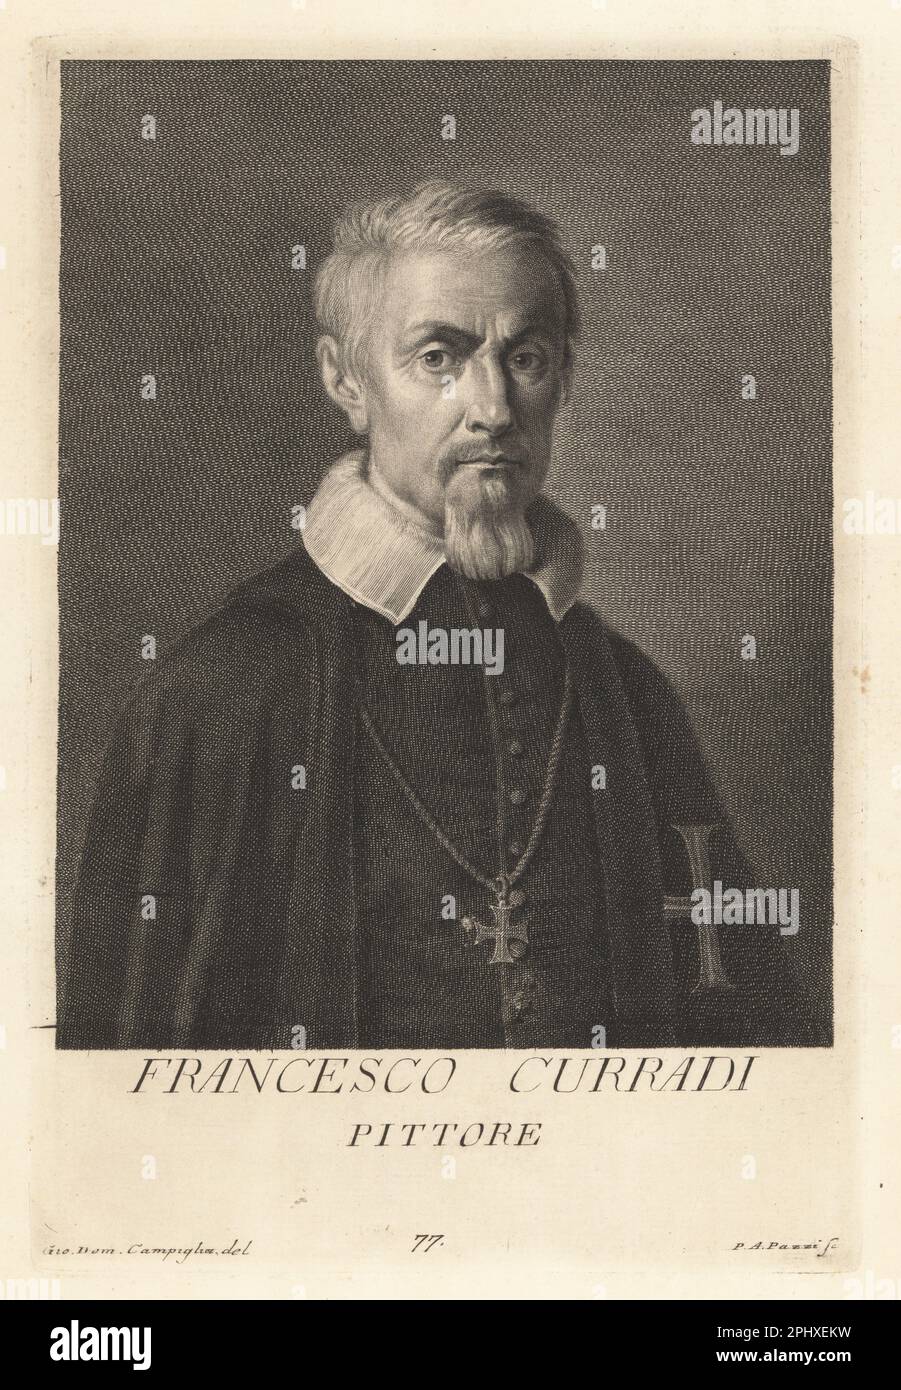 Francesco Currado, Italian painter of the Counter-Maniera style, 1570-1661. Painter of historical subjects in Florence. In robes of a knight of the Order of Christ. Francesco Curradi, Pittore. Copperplate engraving by Pietro Antonio Pazzi after Giovanni Domenico Campiglia after a self portrait by the artist from Francesco Moucke's Museo Florentino (Museum Florentinum), Serie di Ritratti de Pittori (Series of Portraits of Painters) stamperia Mouckiana, Florence, 1752-62. Stock Photo